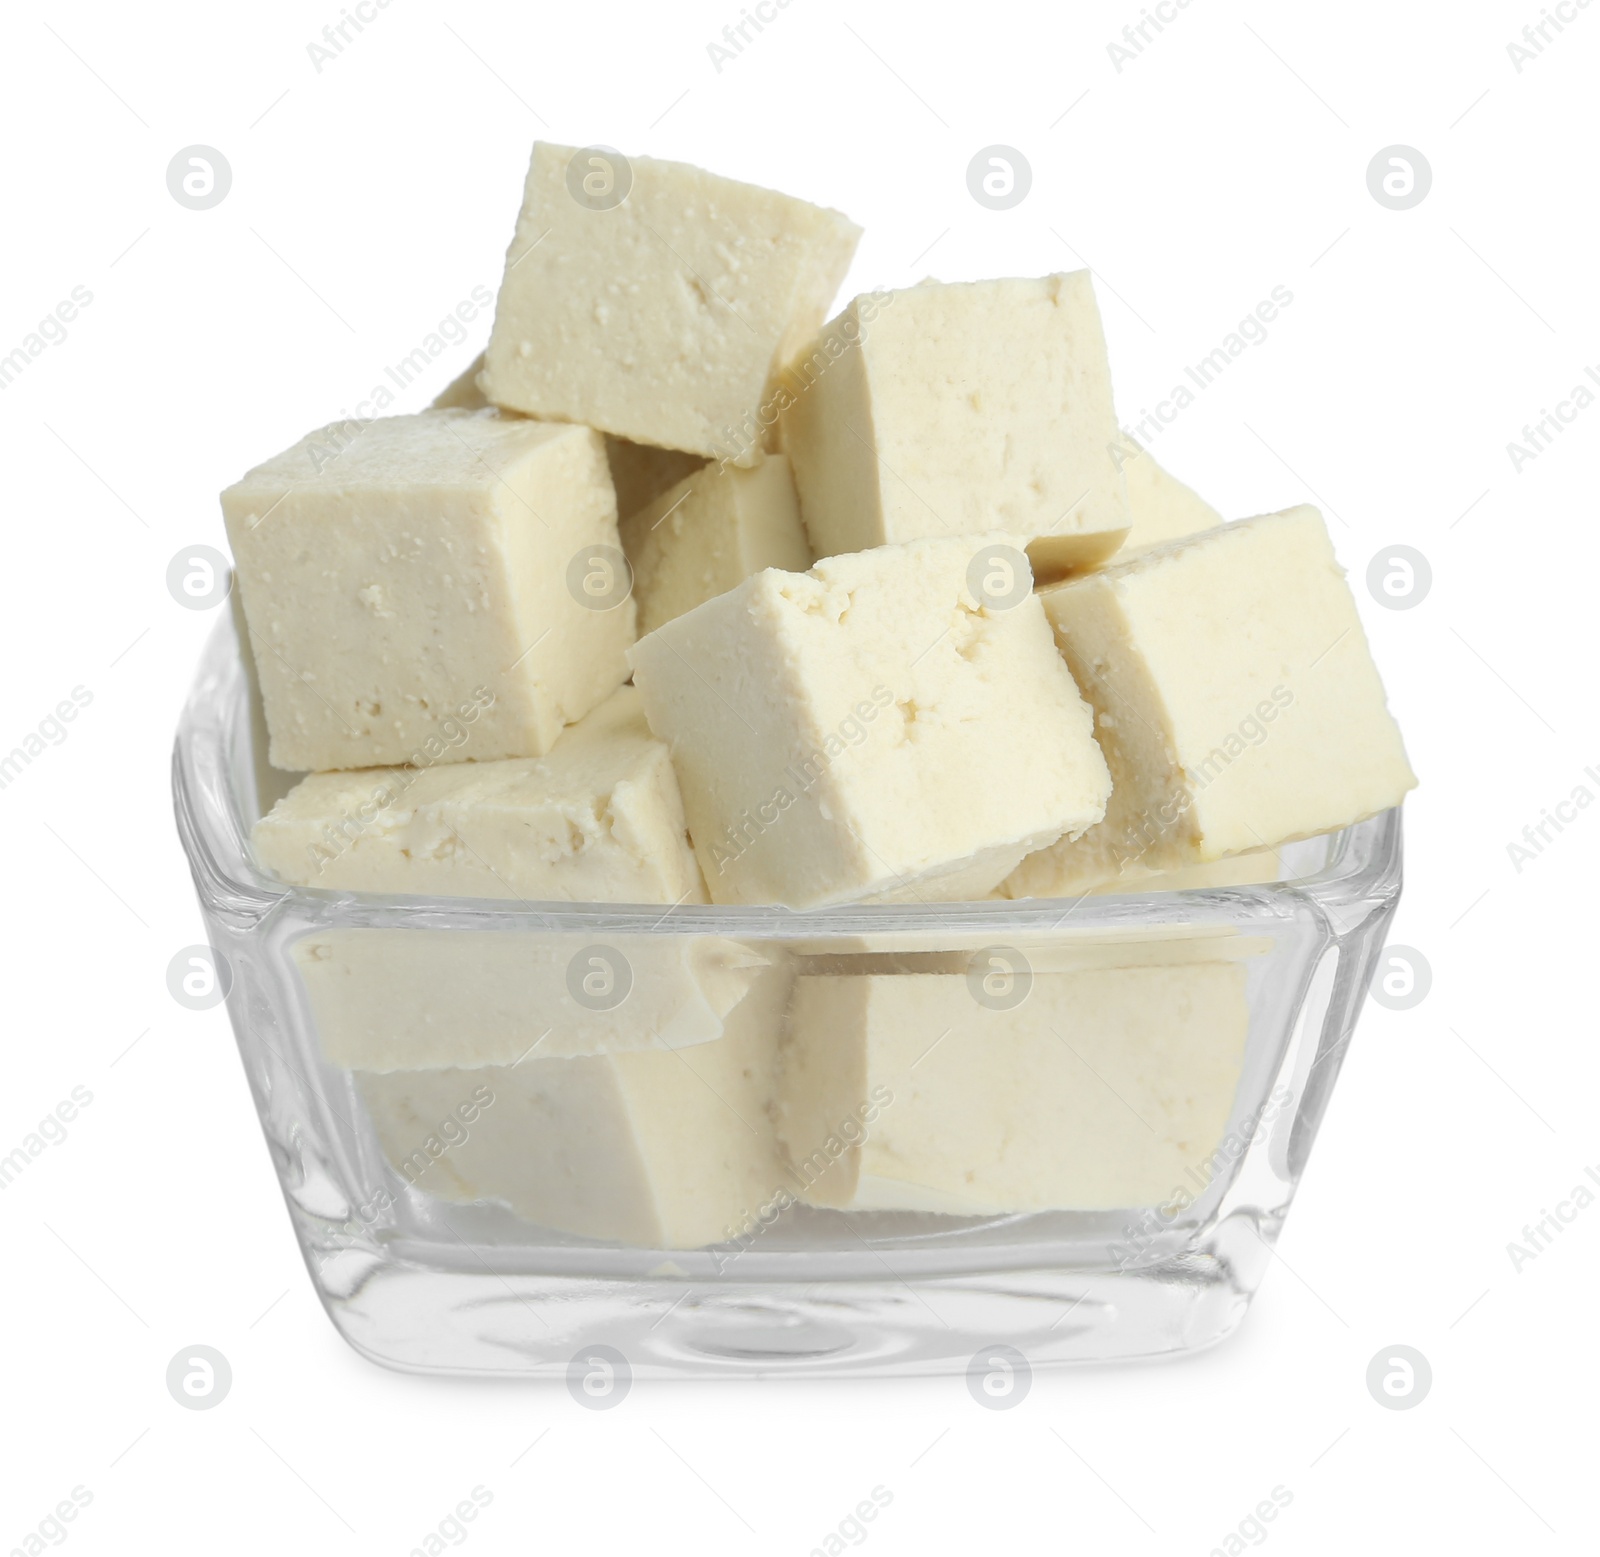 Photo of Pieces of delicious tofu in glass bowl on white background. Soybean curd